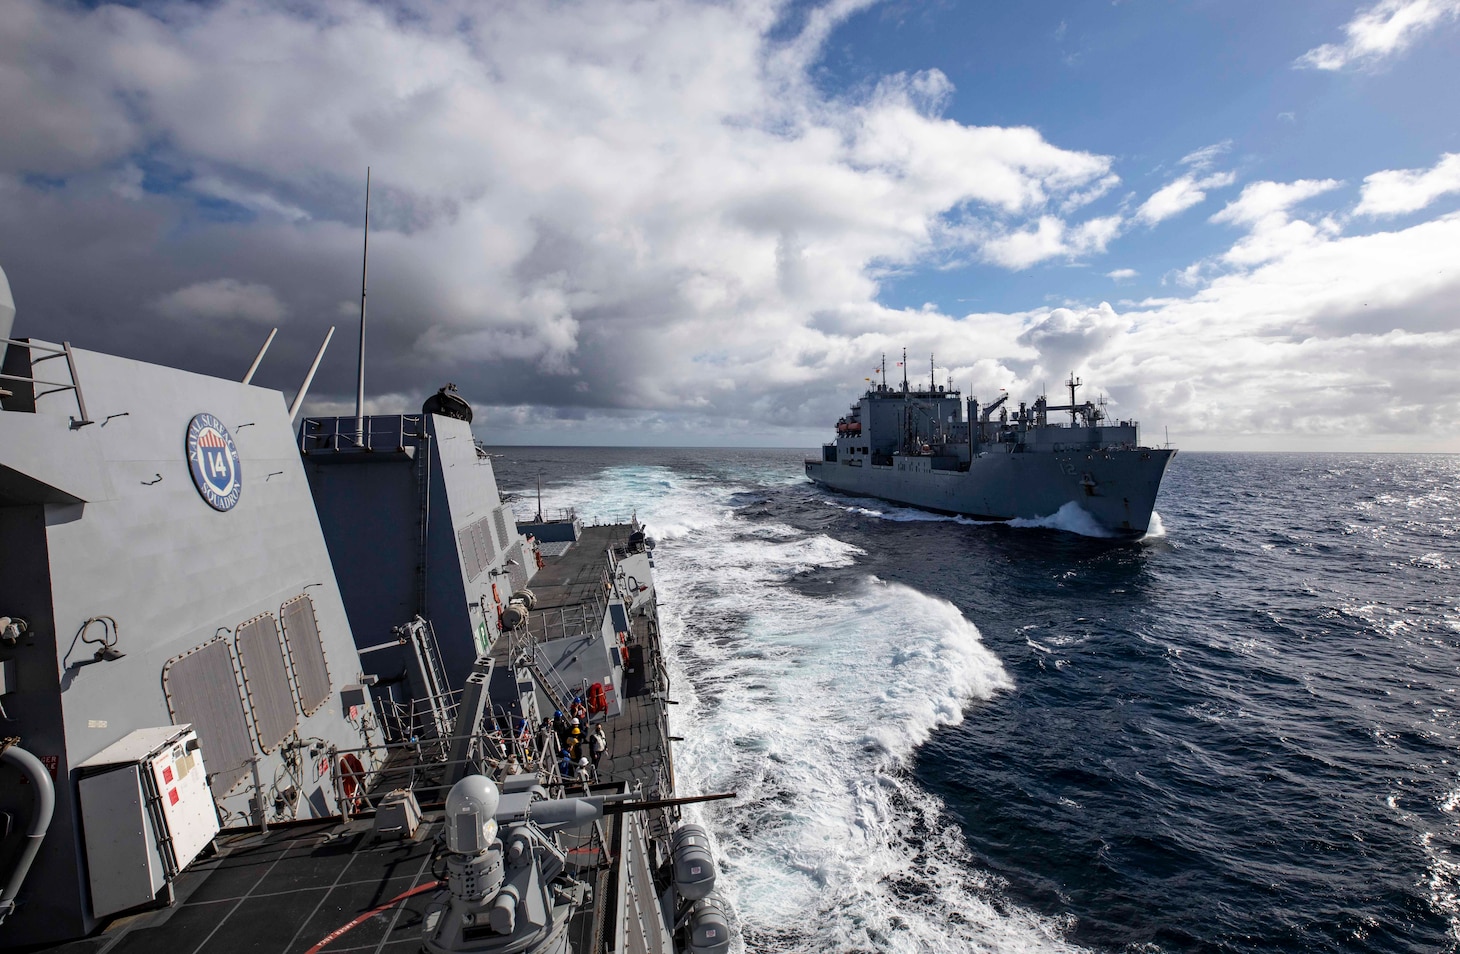 The Arleigh Burke-class guided-missile destroyer USS Paul Ignatius (DDG 117) pulls away from the Military Sealift Command dry cargo and ammunition ship USNS William McLean (T-AKE 12) after a replenishment-at-sea evolution.